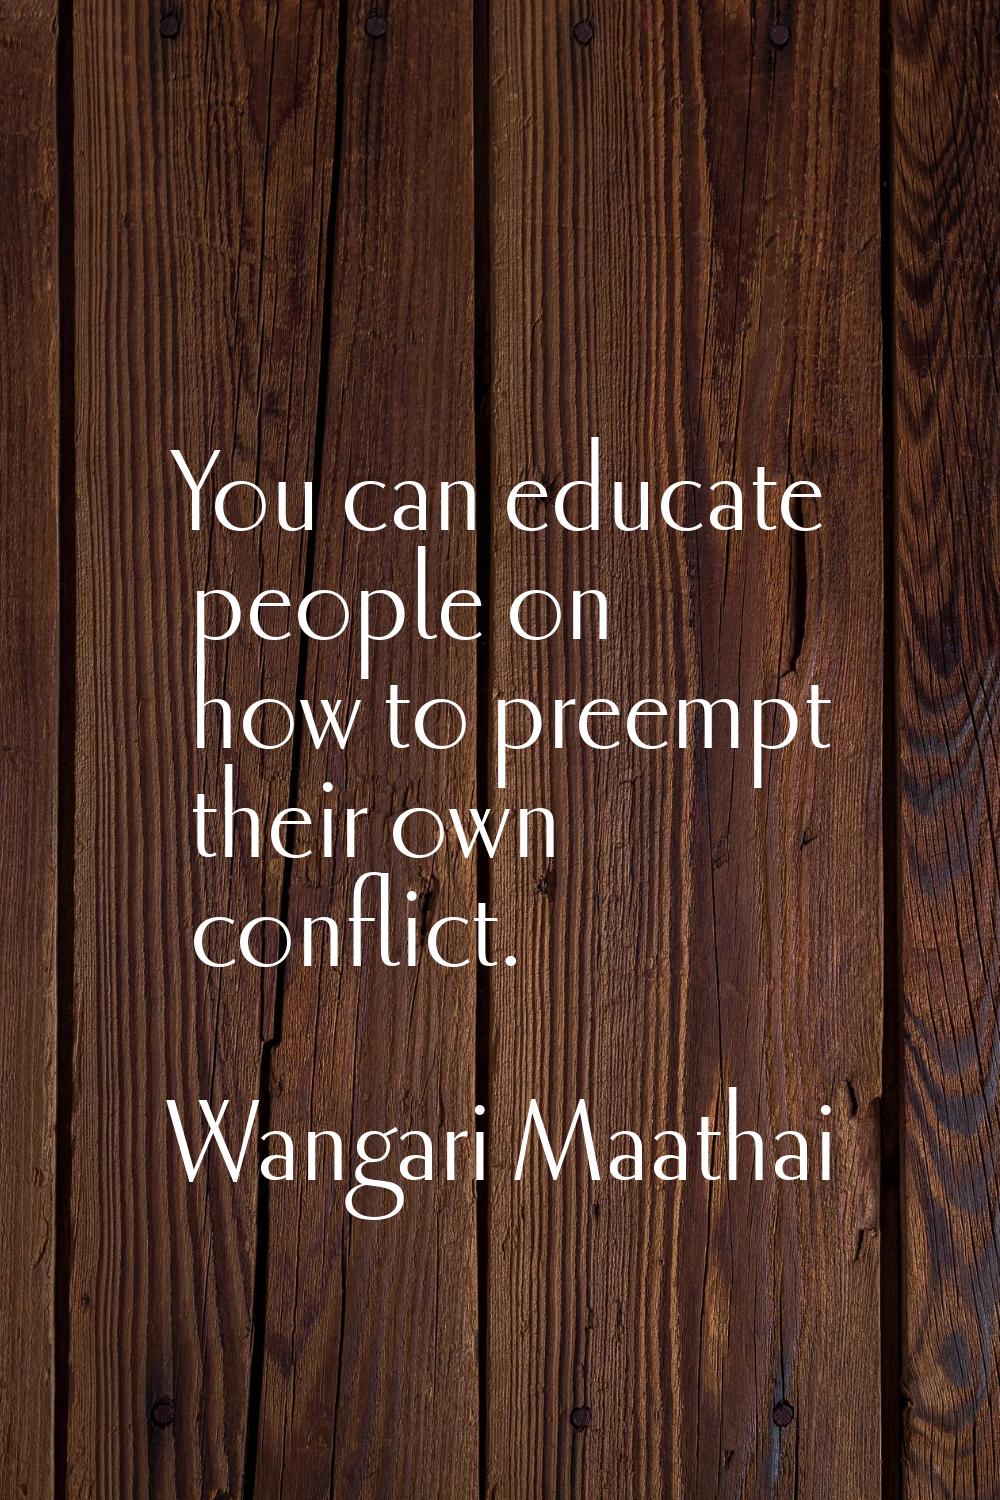 You can educate people on how to preempt their own conflict.